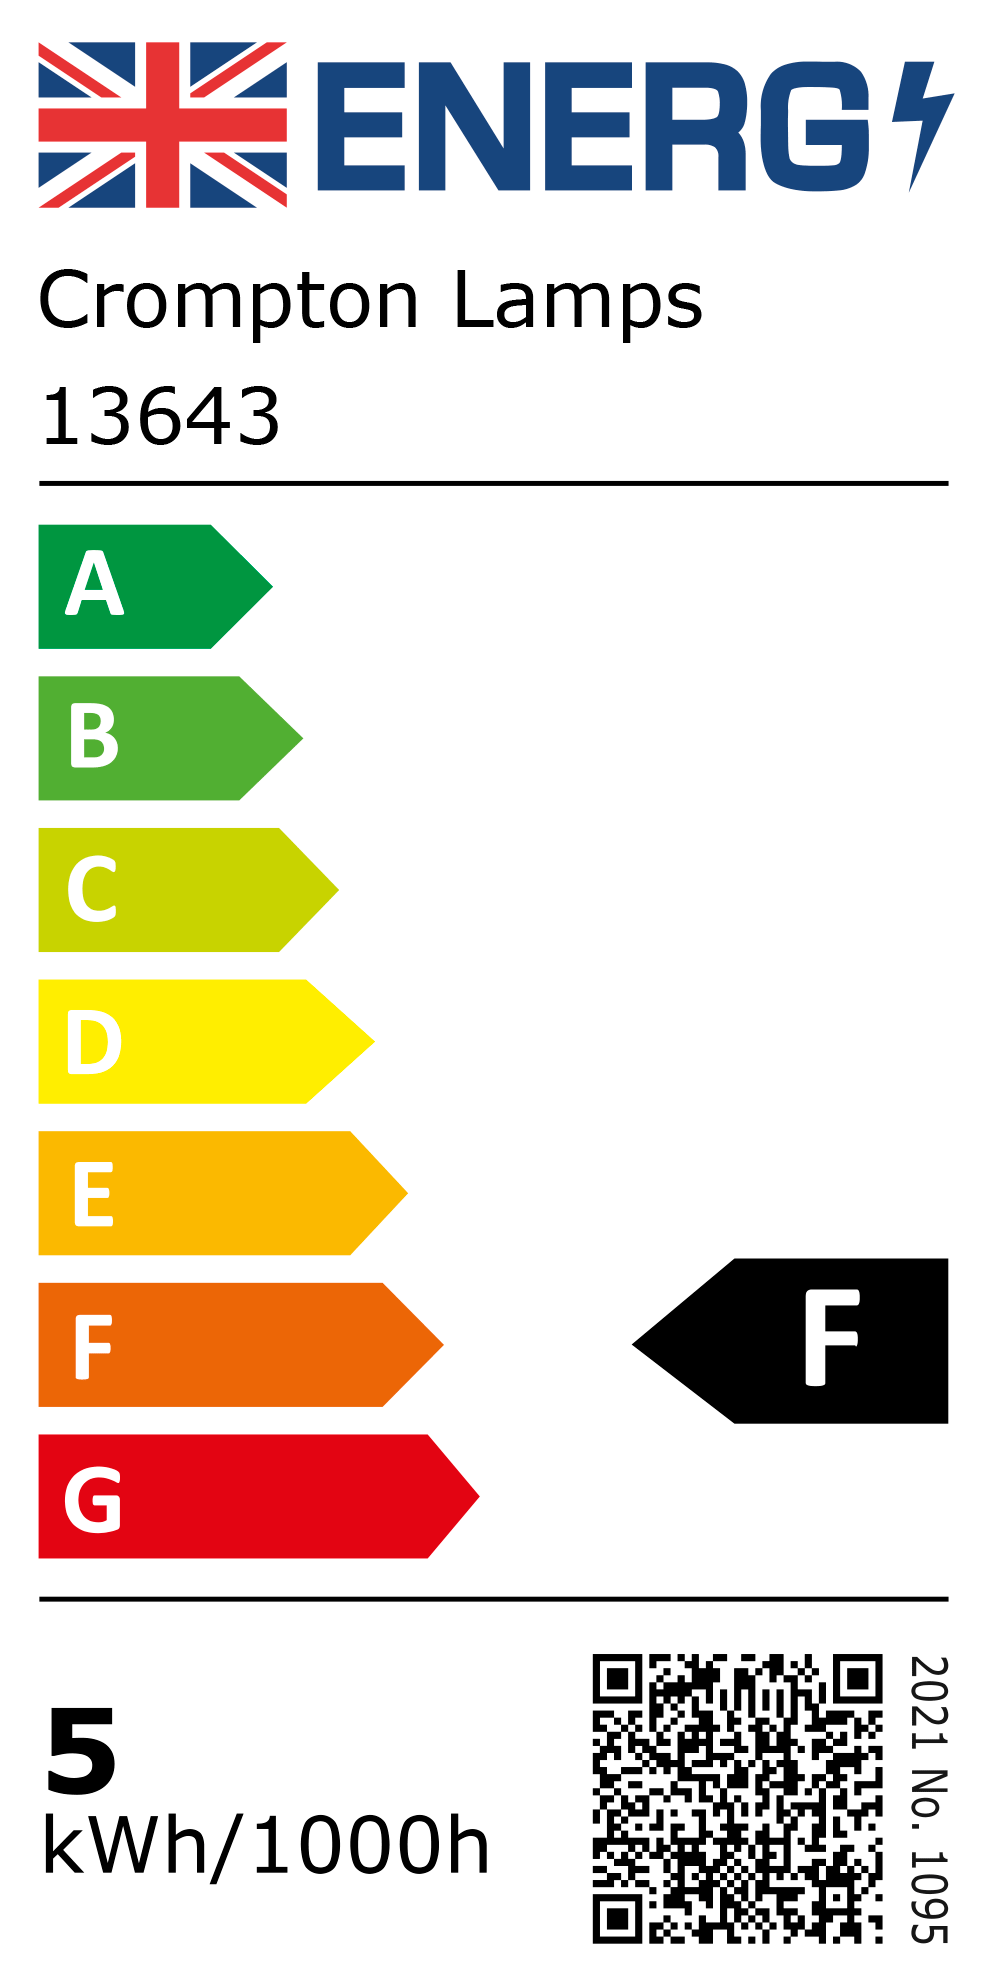 New 2021 Energy Rating Label: Stock Code 13643